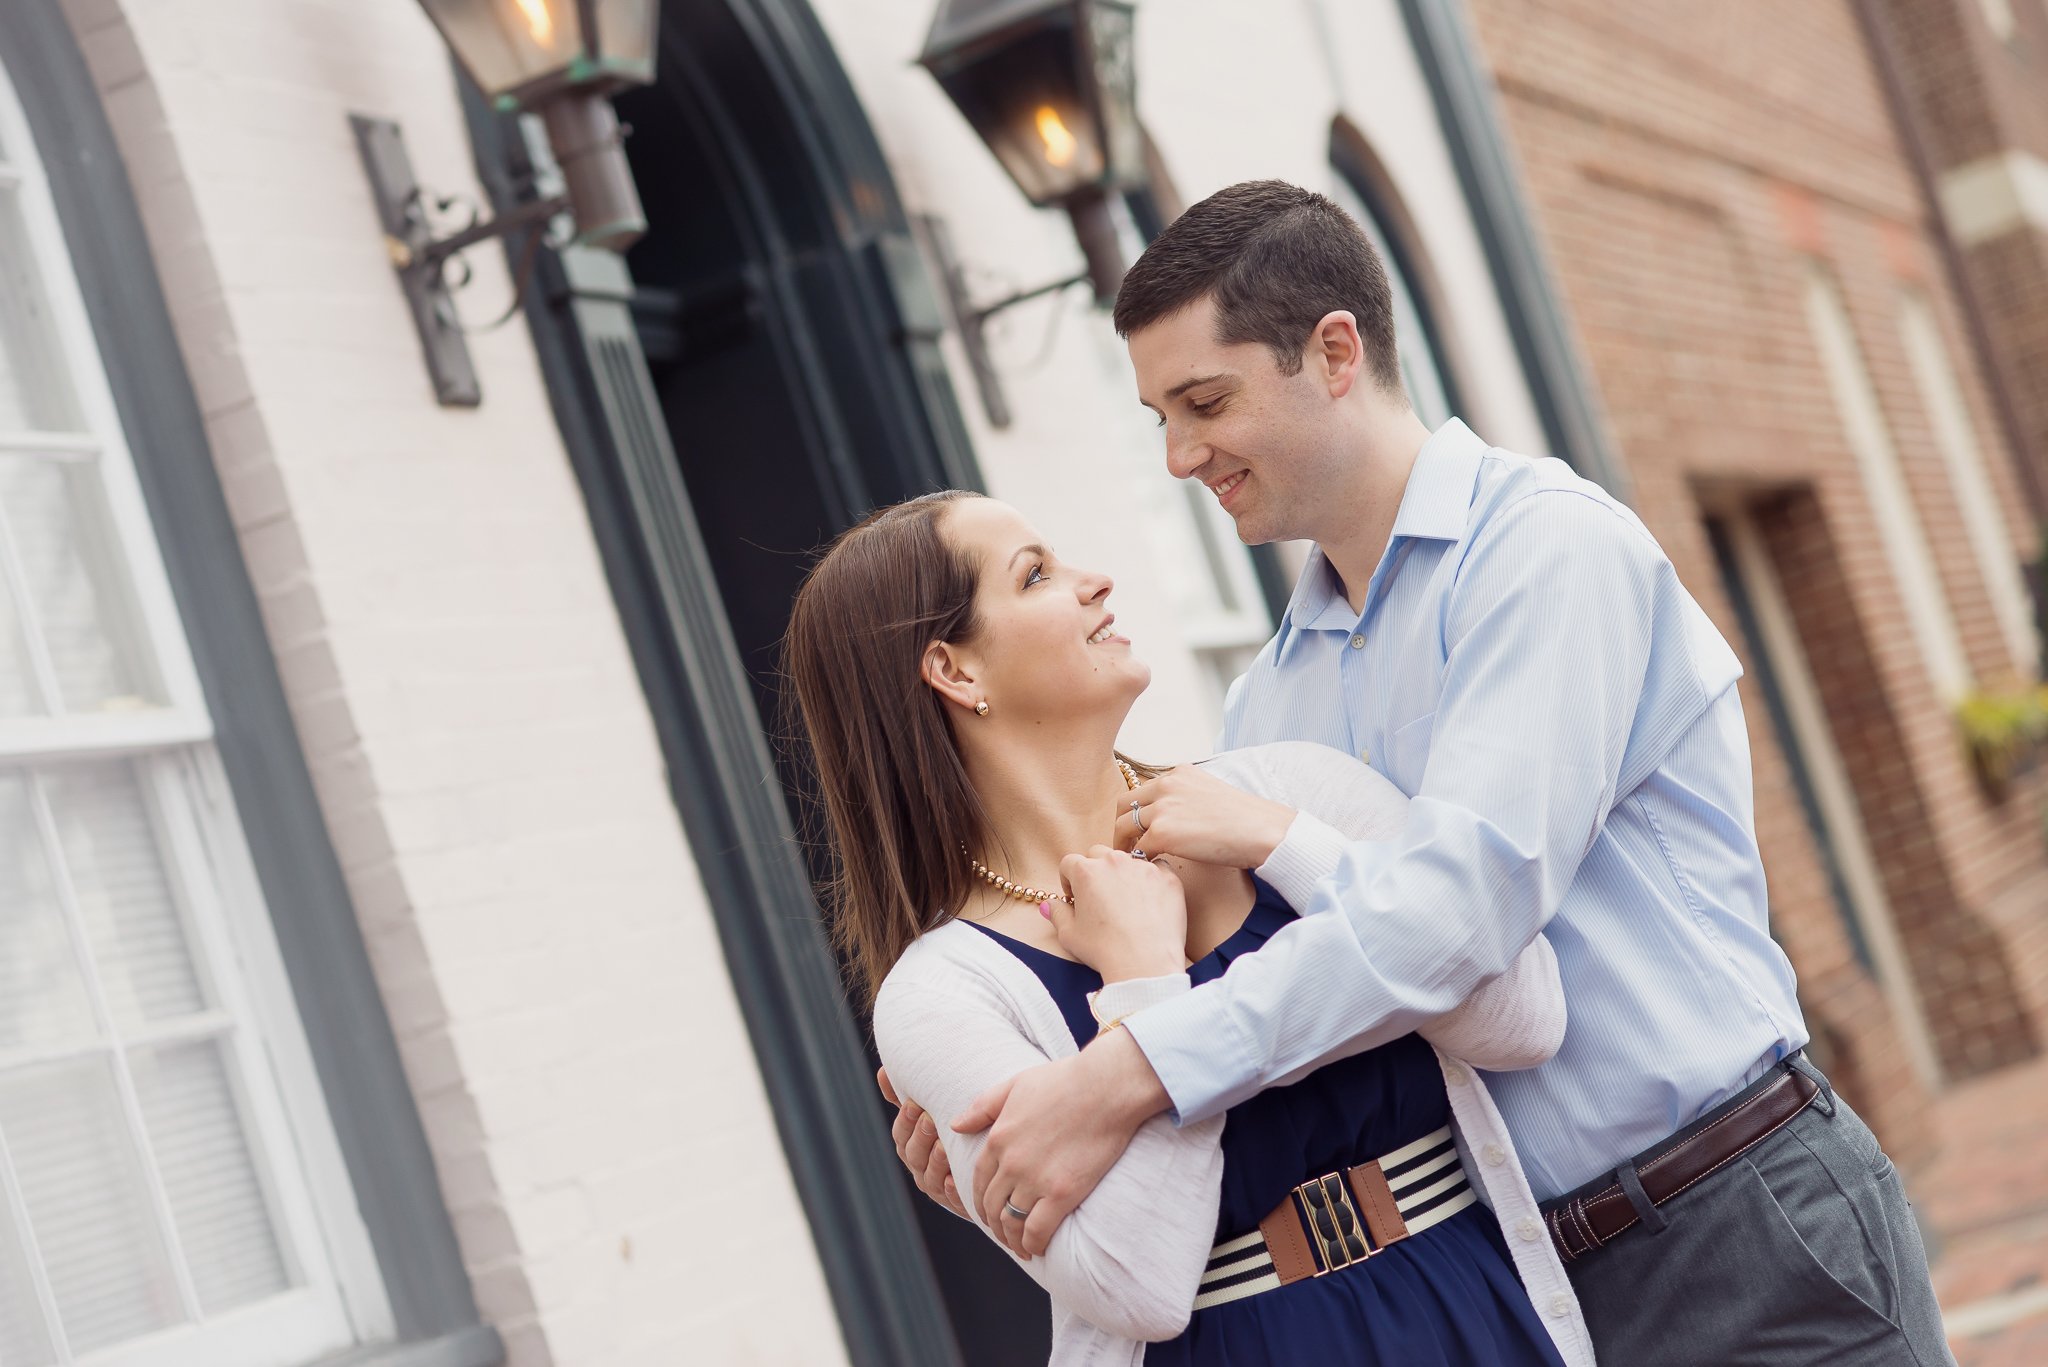 couple's session old town alexandria - D'Corzo Photography - DMV area